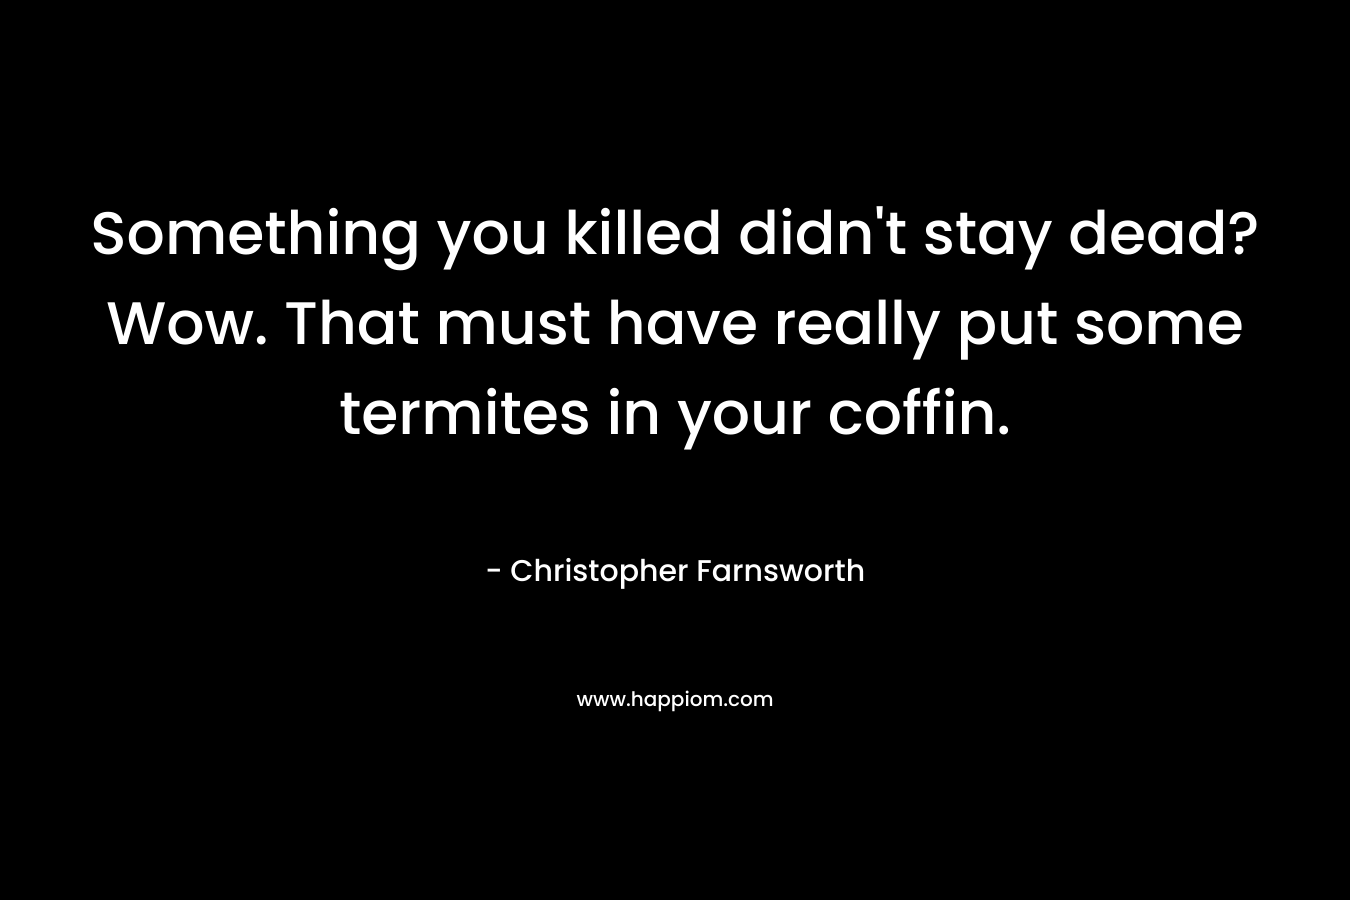 Something you killed didn't stay dead? Wow. That must have really put some termites in your coffin.